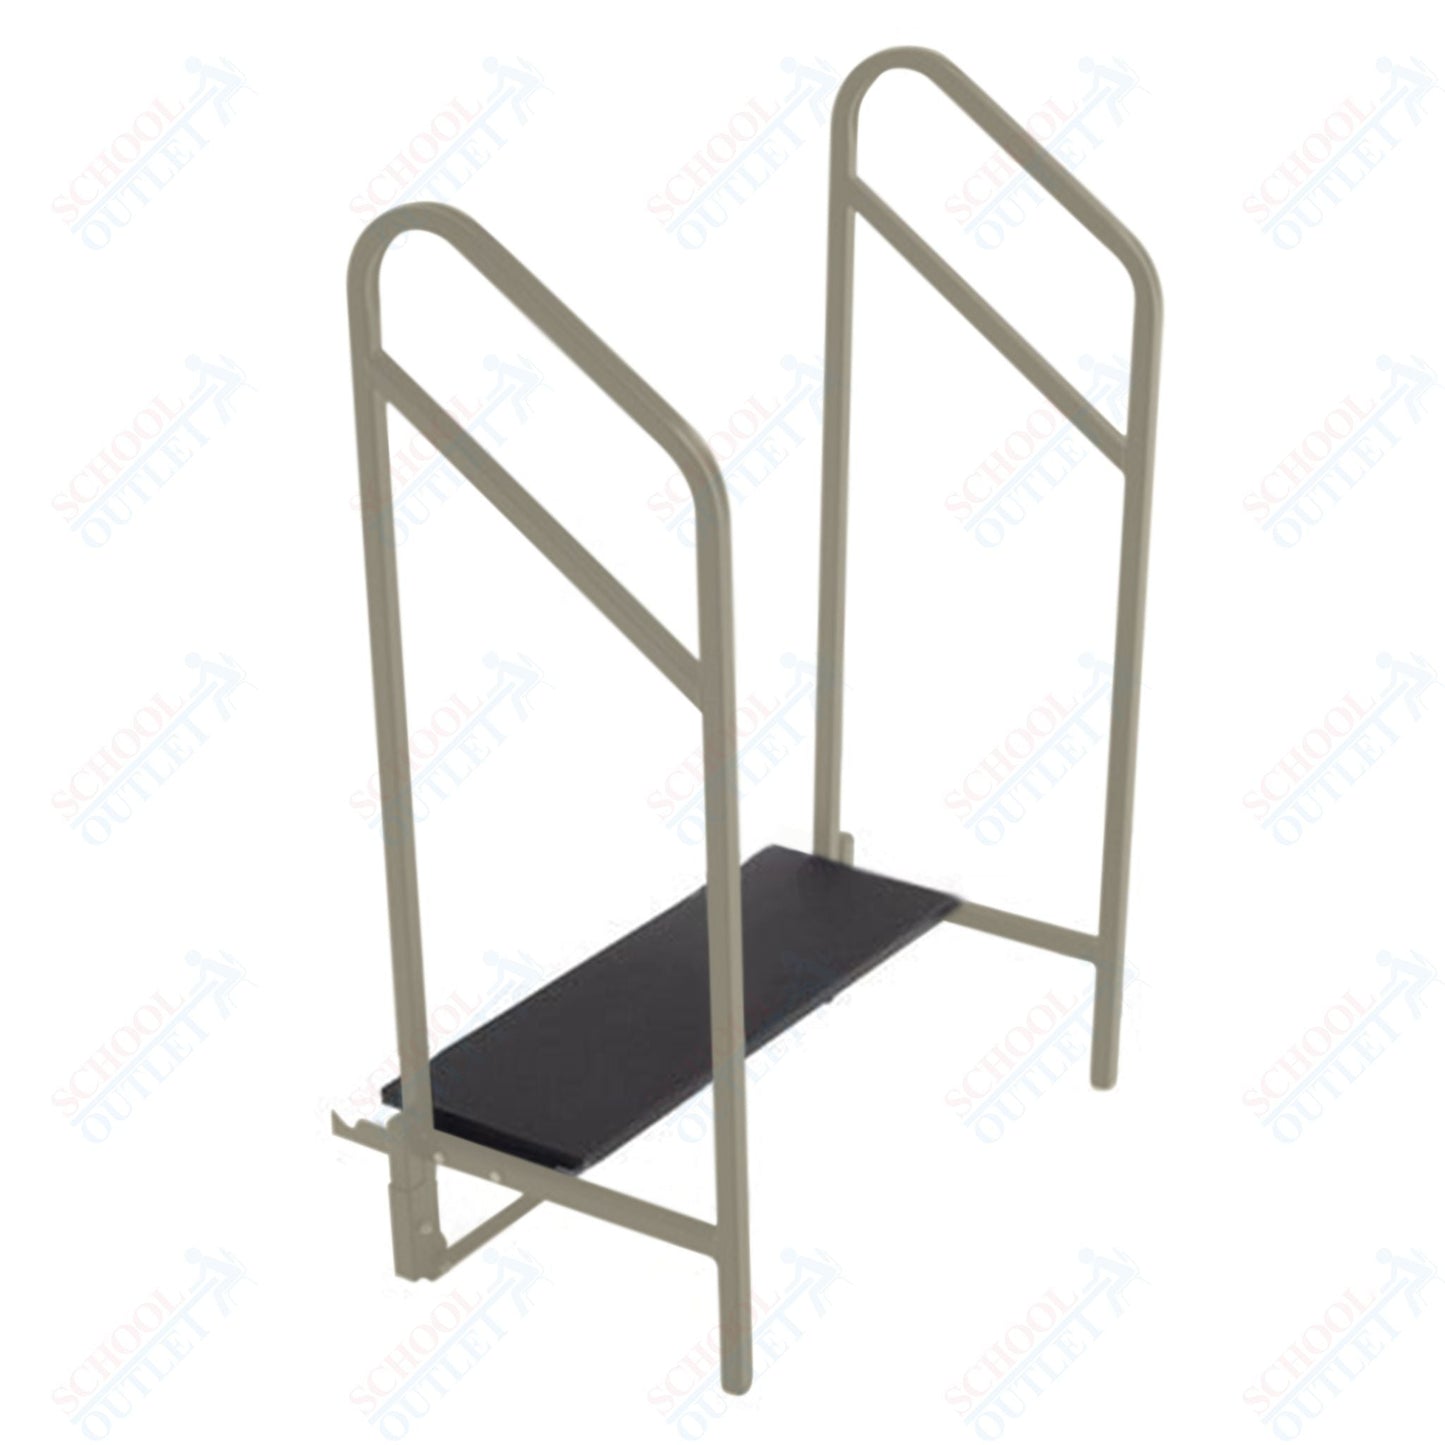 AmTab One Step with Handrails (8"H Step) - 36"W x 15"L x 47"H (AmTab AMT - STP1) - SchoolOutlet